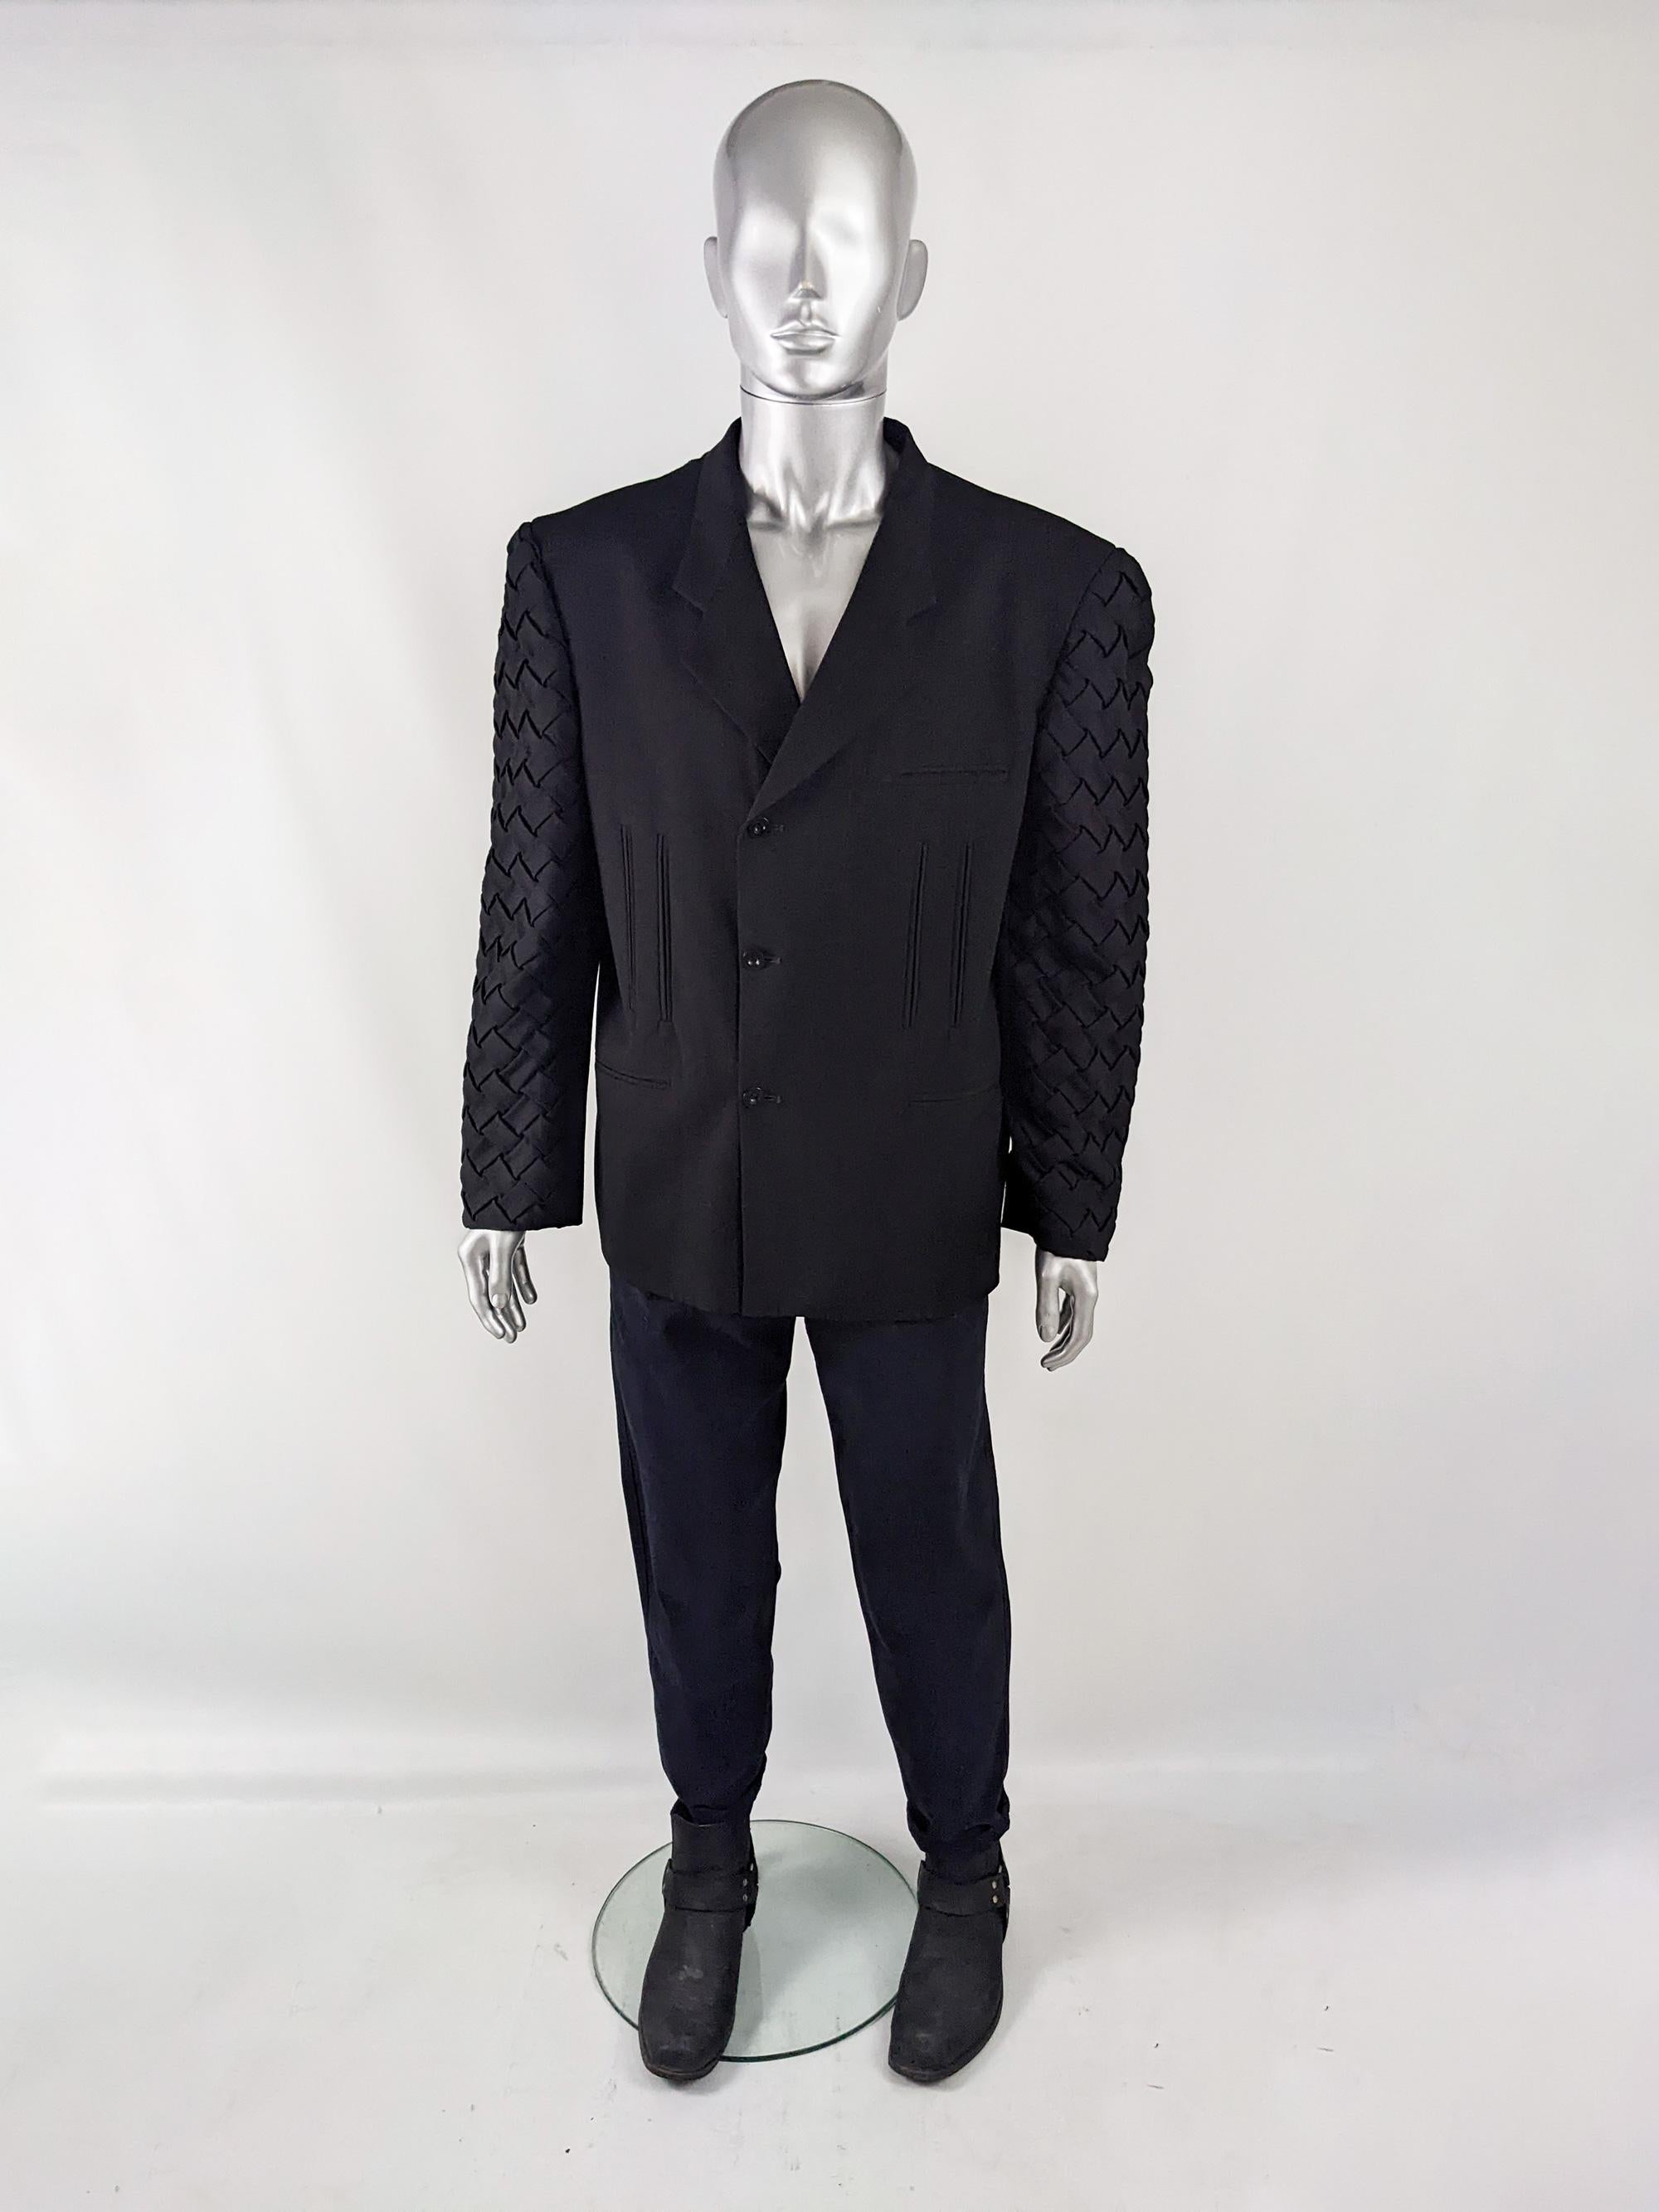 An incredible and avant garde mens jacket from the 80s by Greek designer, Gioni Garavanis. In a black fabric with amazing high fashion details from the wide shoulder pads giving a hyper masculine silhouette, the sleeves that have an incredible,